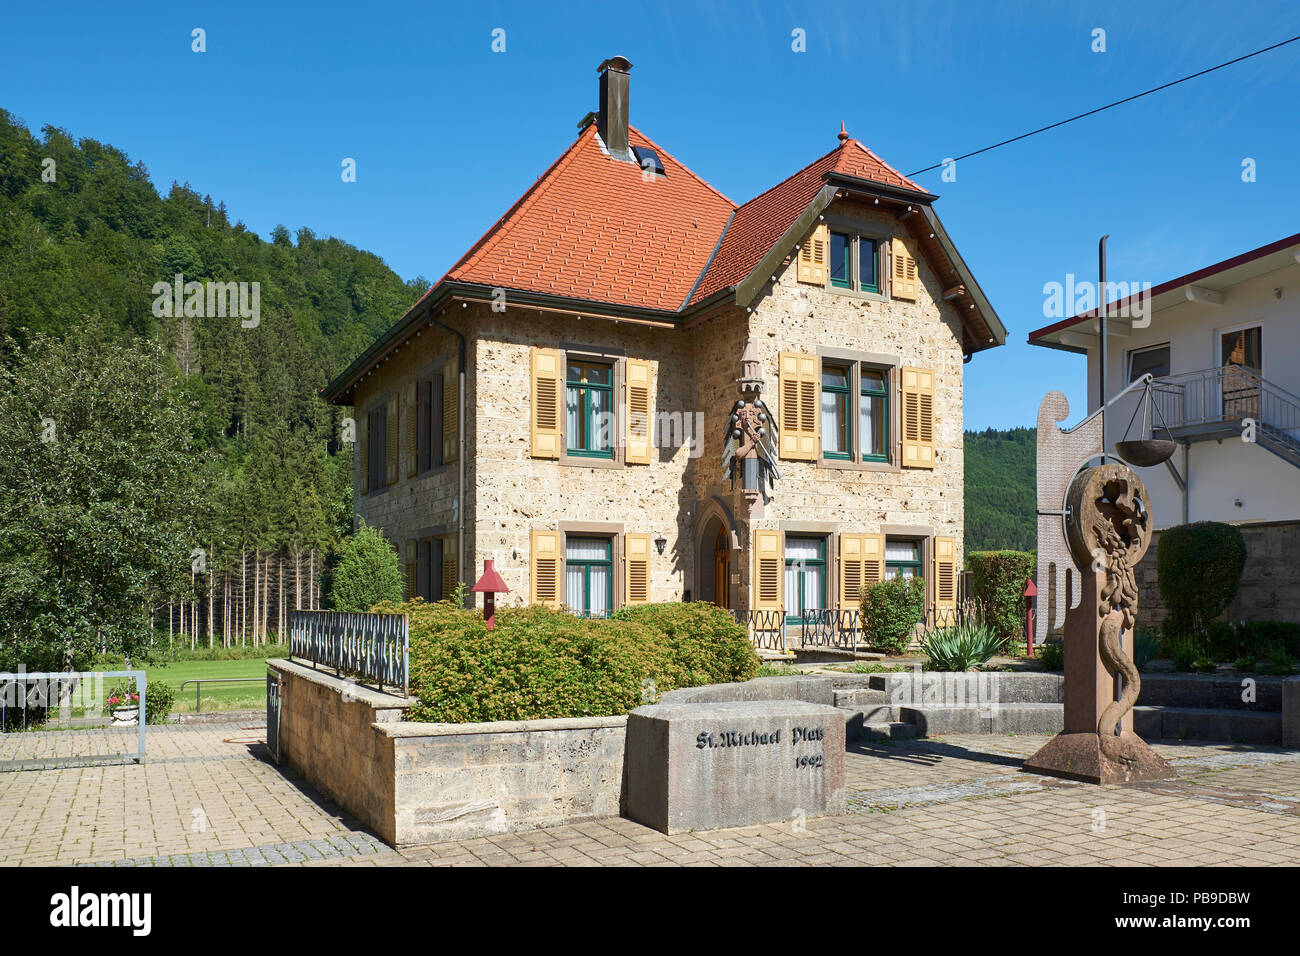 Rectory, built from Bärenthal lime stone, in the community Bärenthal, Tuttlingen district, Baden-Württemberg, Germany Stock Photo